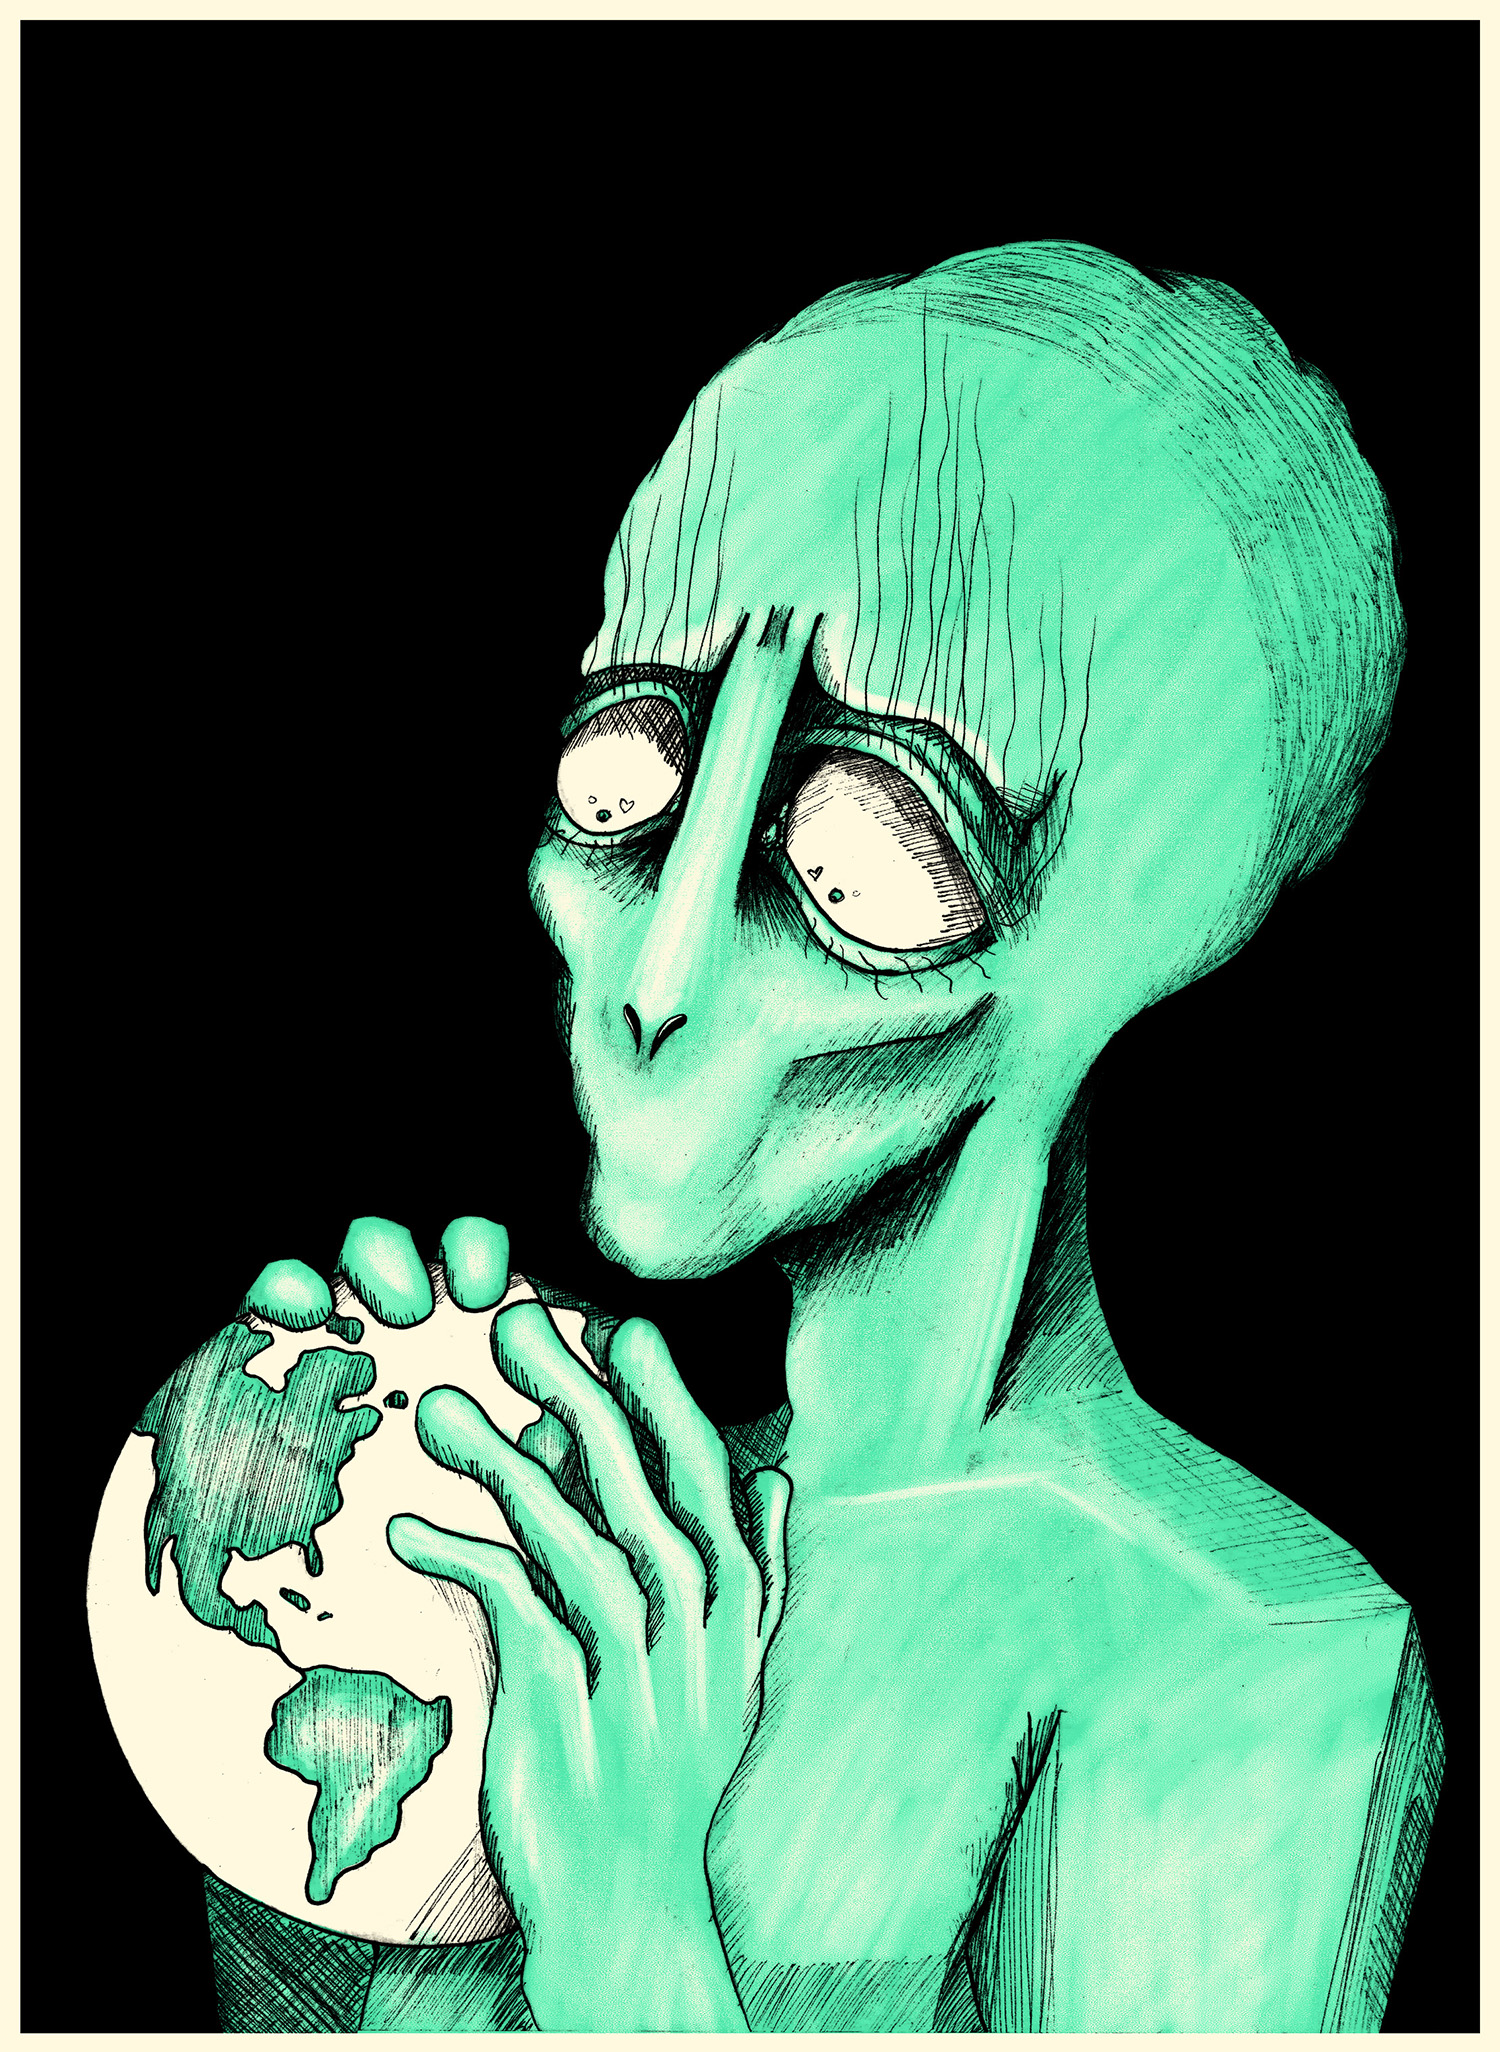 A close up of a green alien holding the earth in its hands and looking concerned. Alien figure is on a black background.